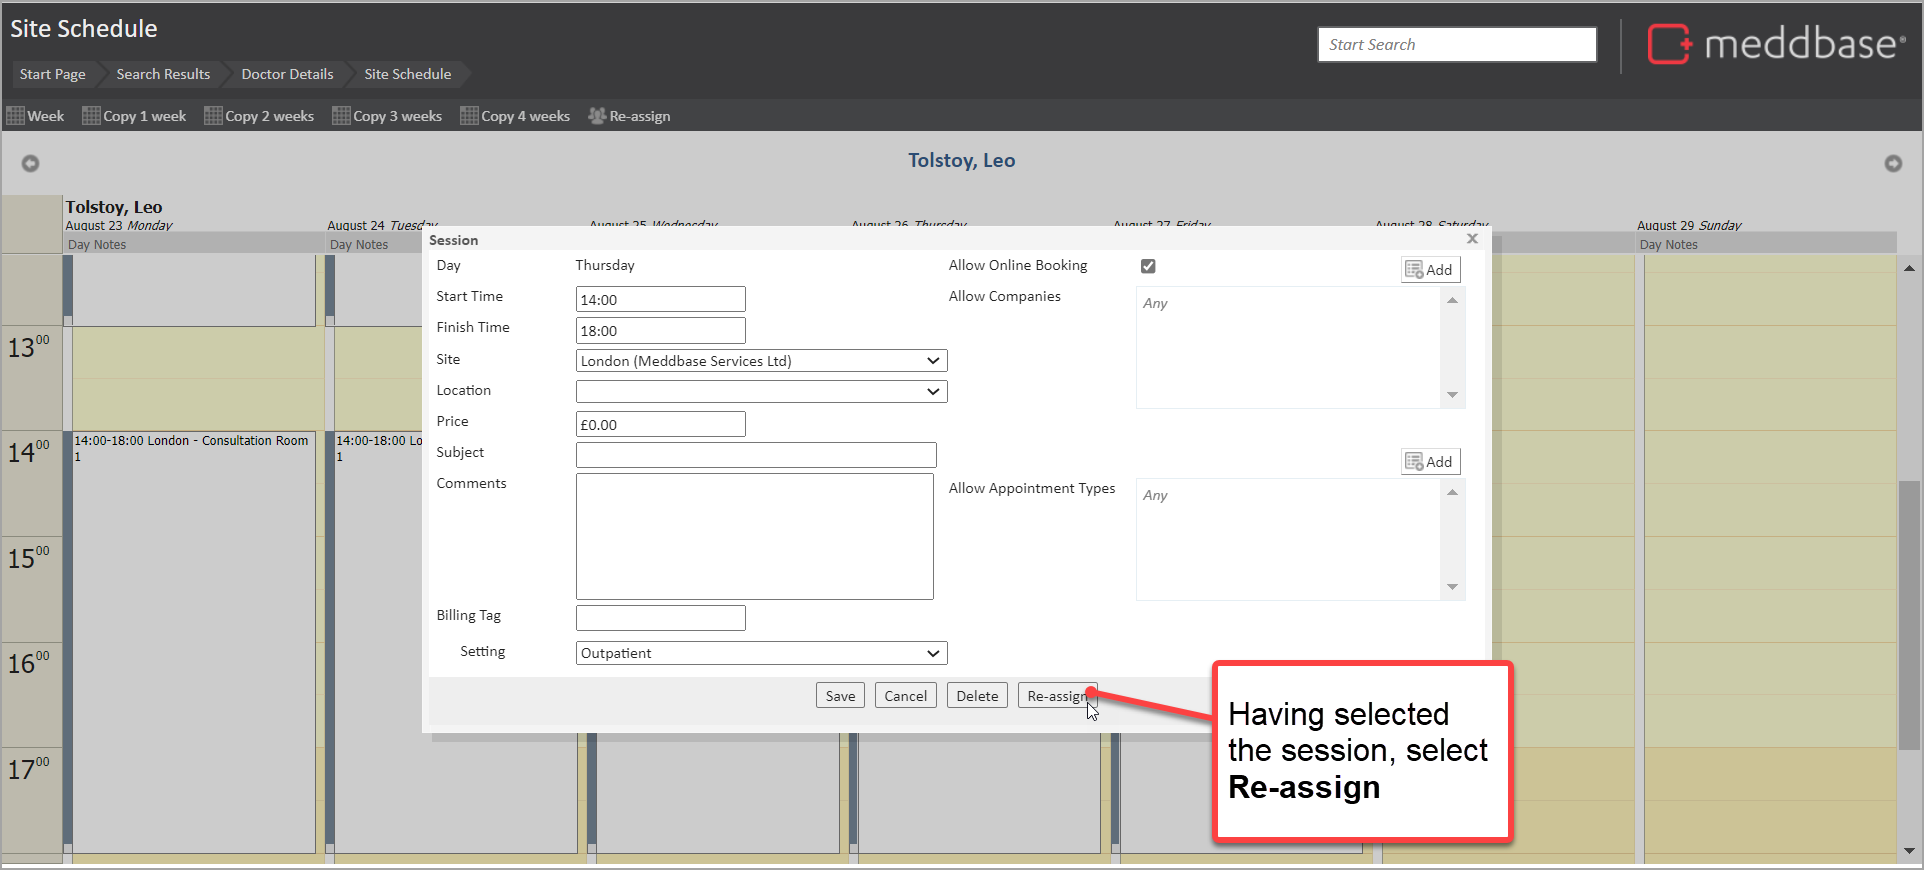 Existing session displayed on screen with annotation drawing attention to the re-assign button